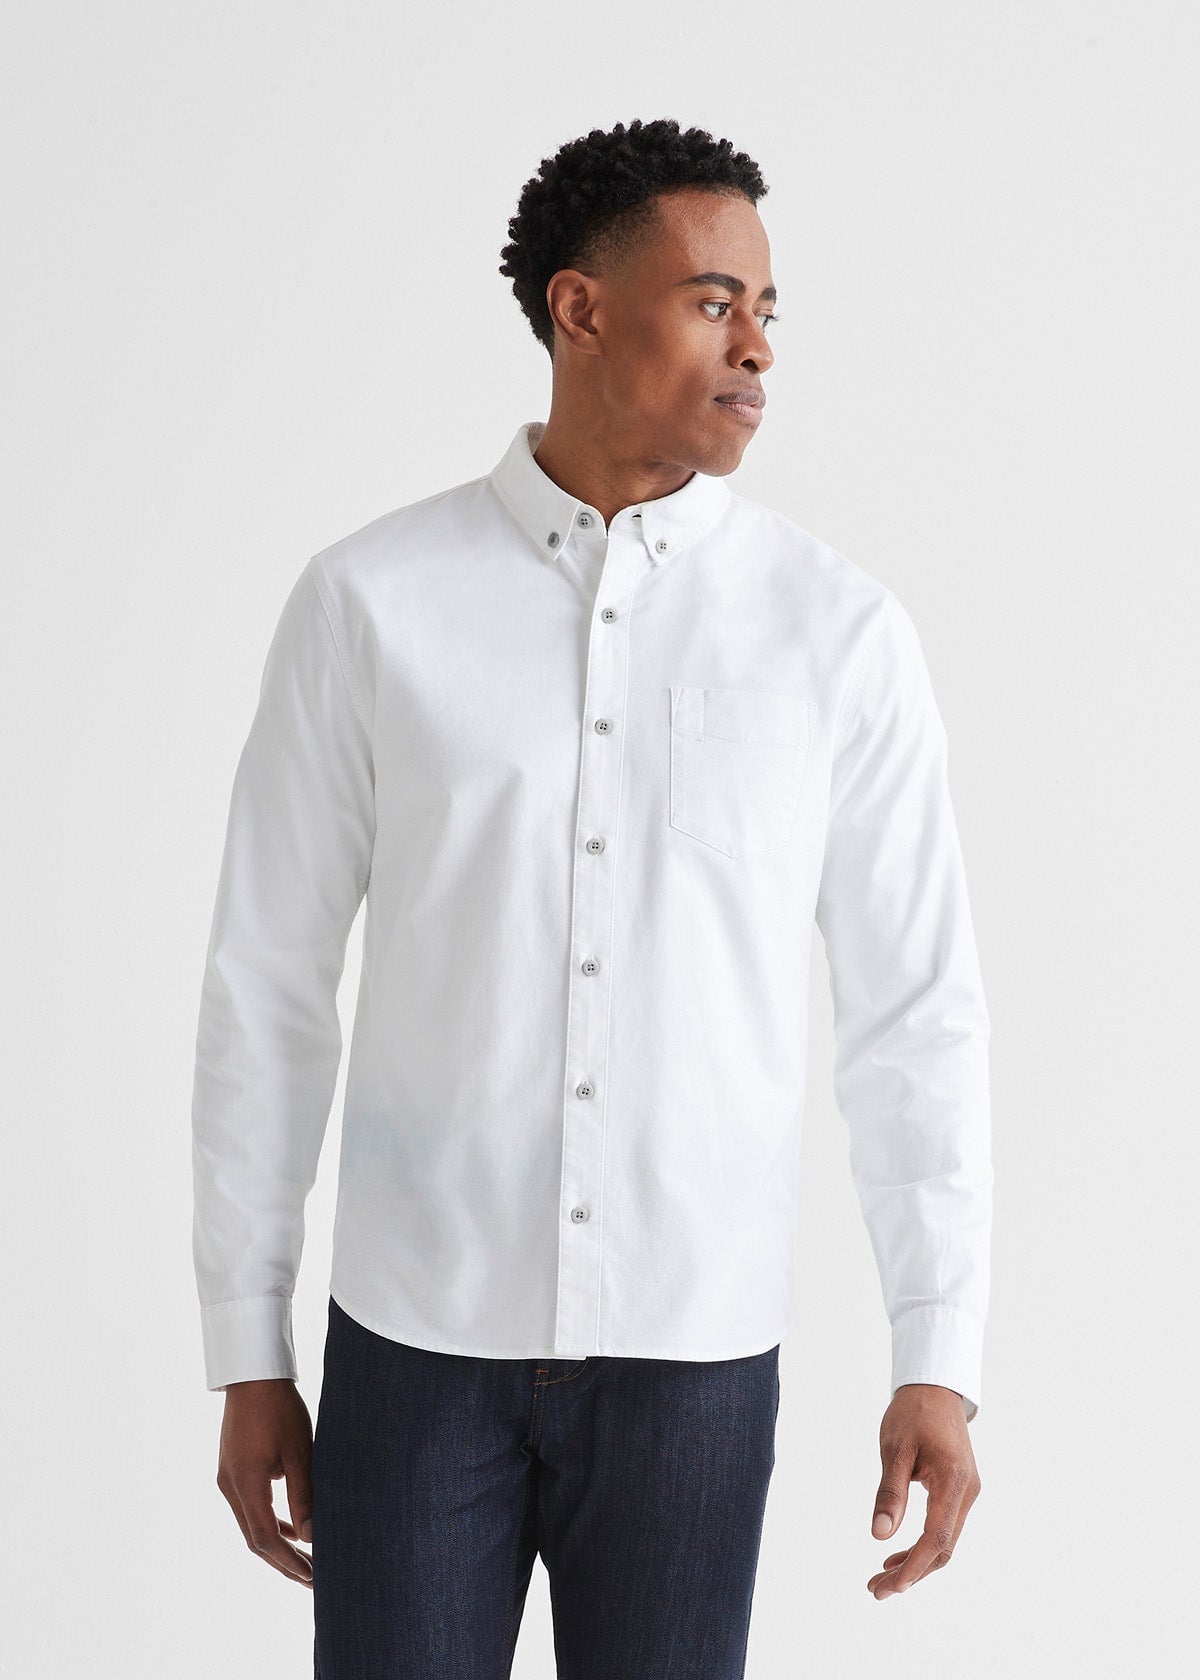 mens white stretch button down shirt front